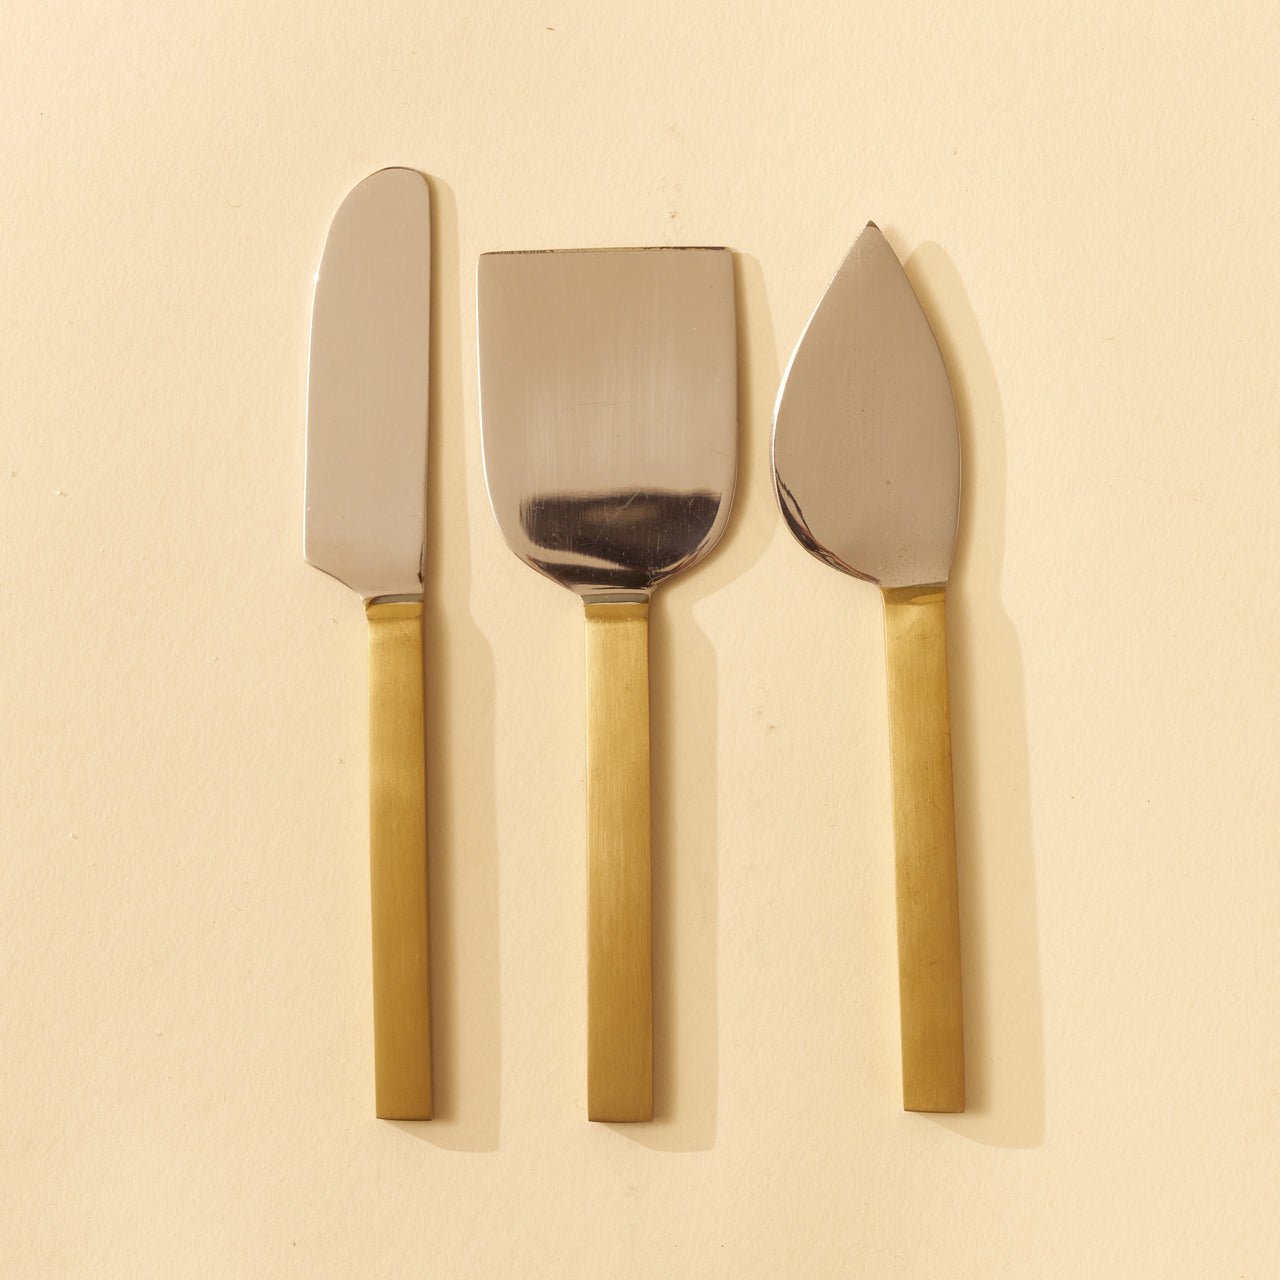 Two-Toned Cheese Knives Set